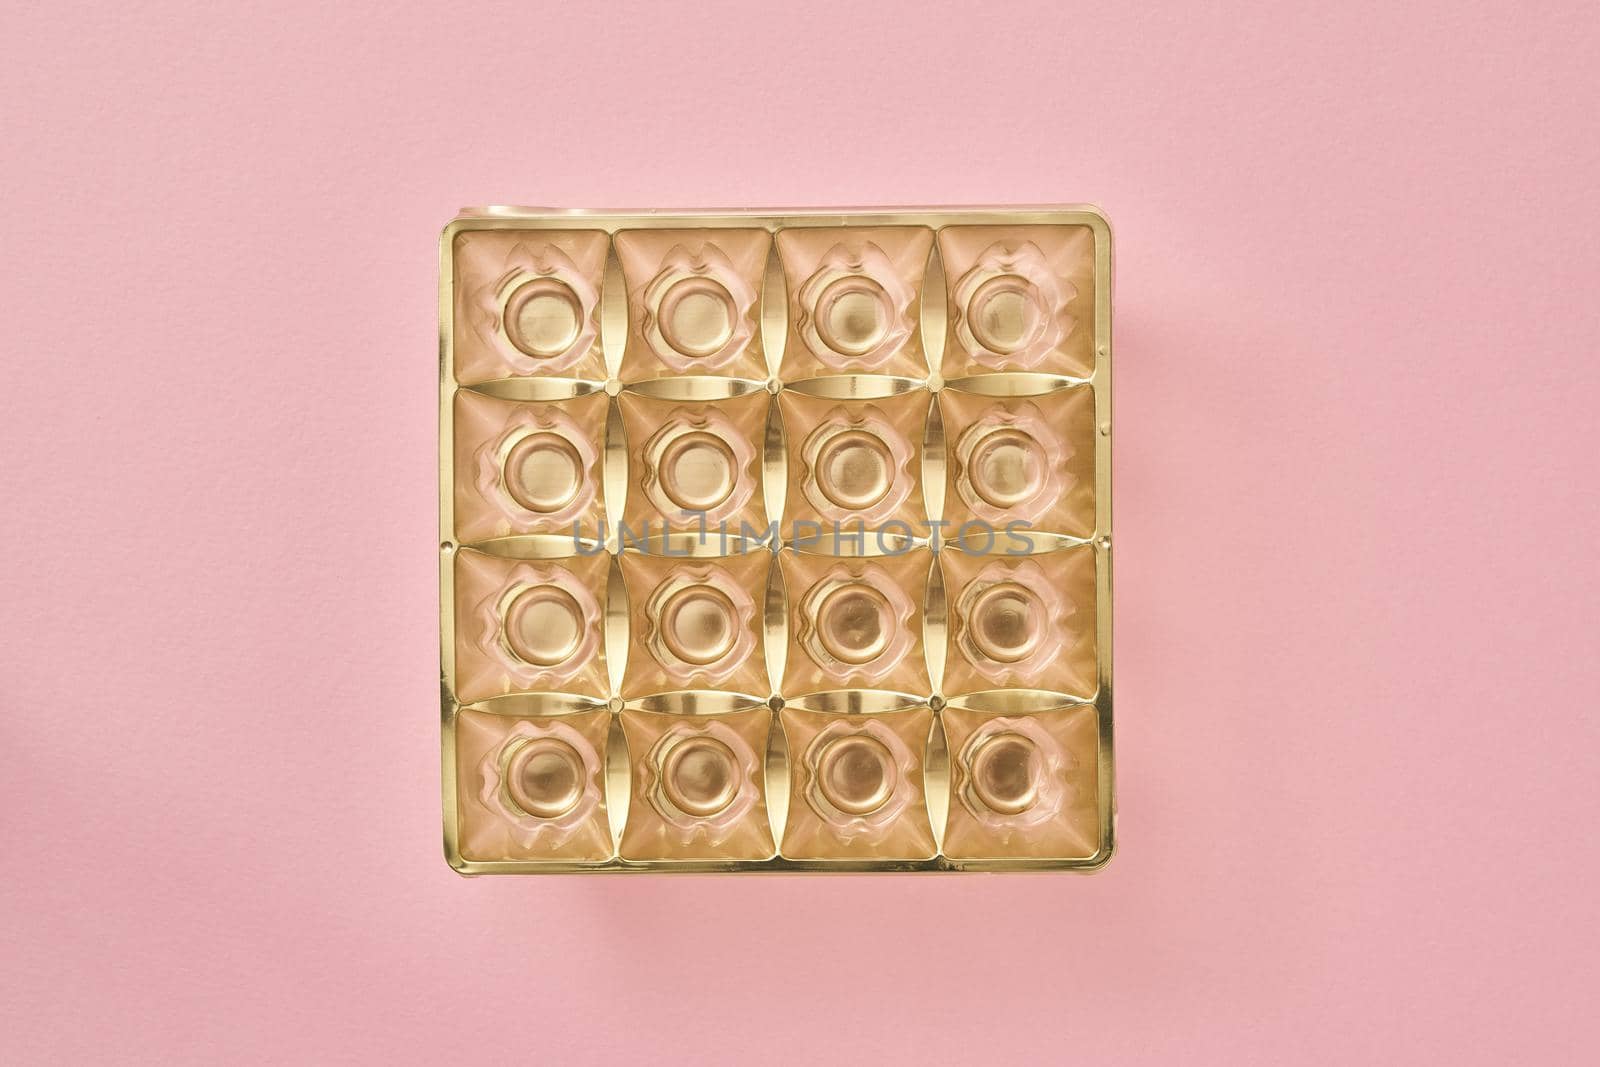 Empty box of chocolates on pink pastel background - birthday or party concept by madeleine_steinbach